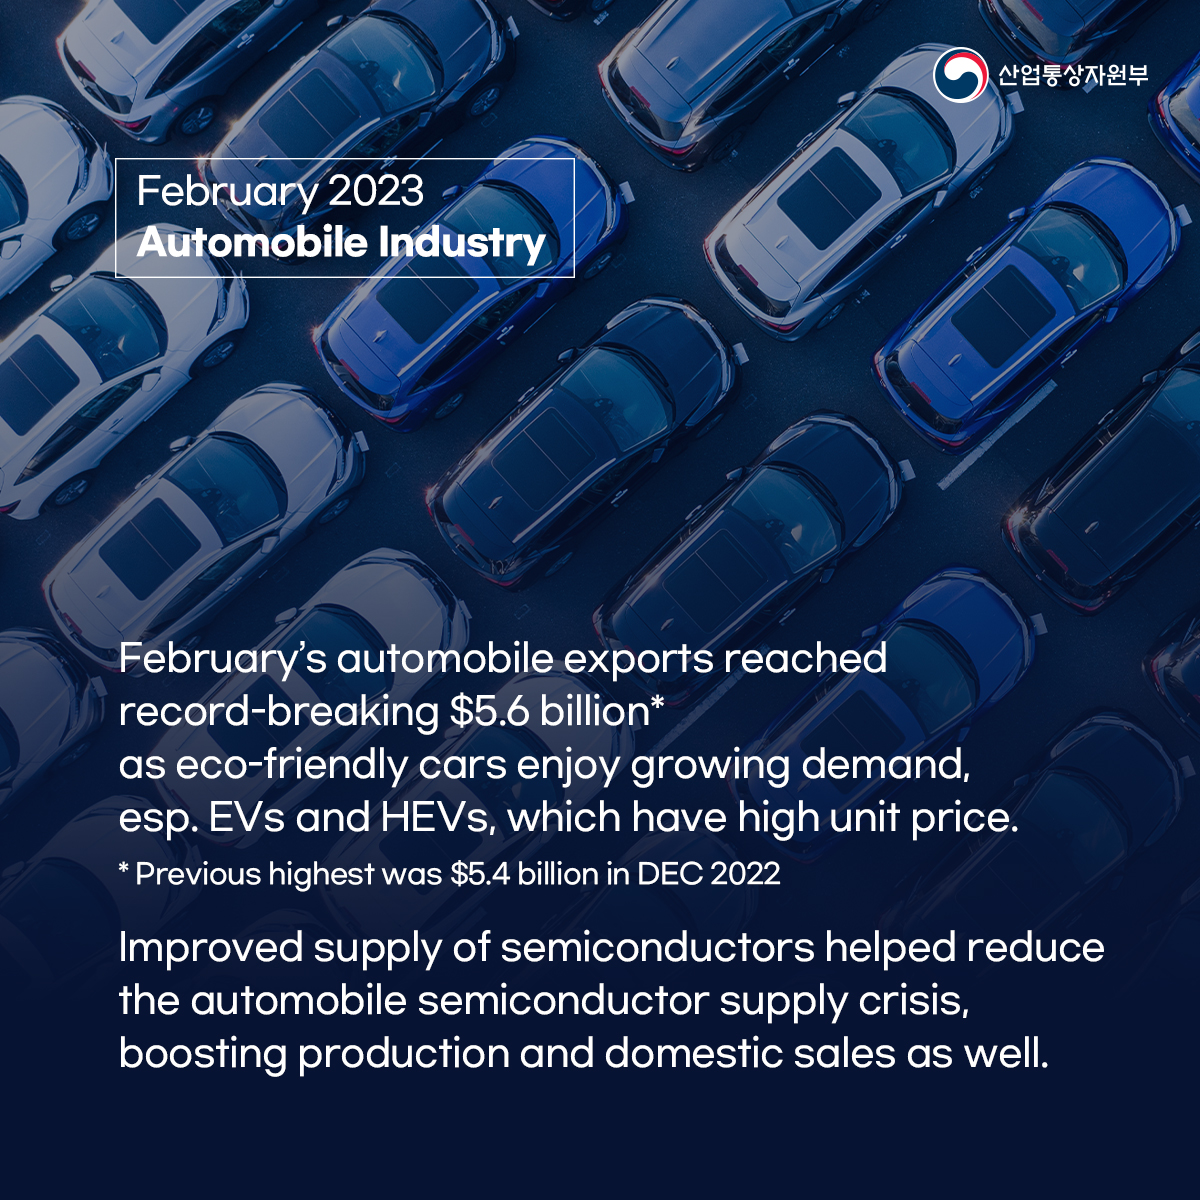 Korea's auto exports hit all-time highs in February! Image 1